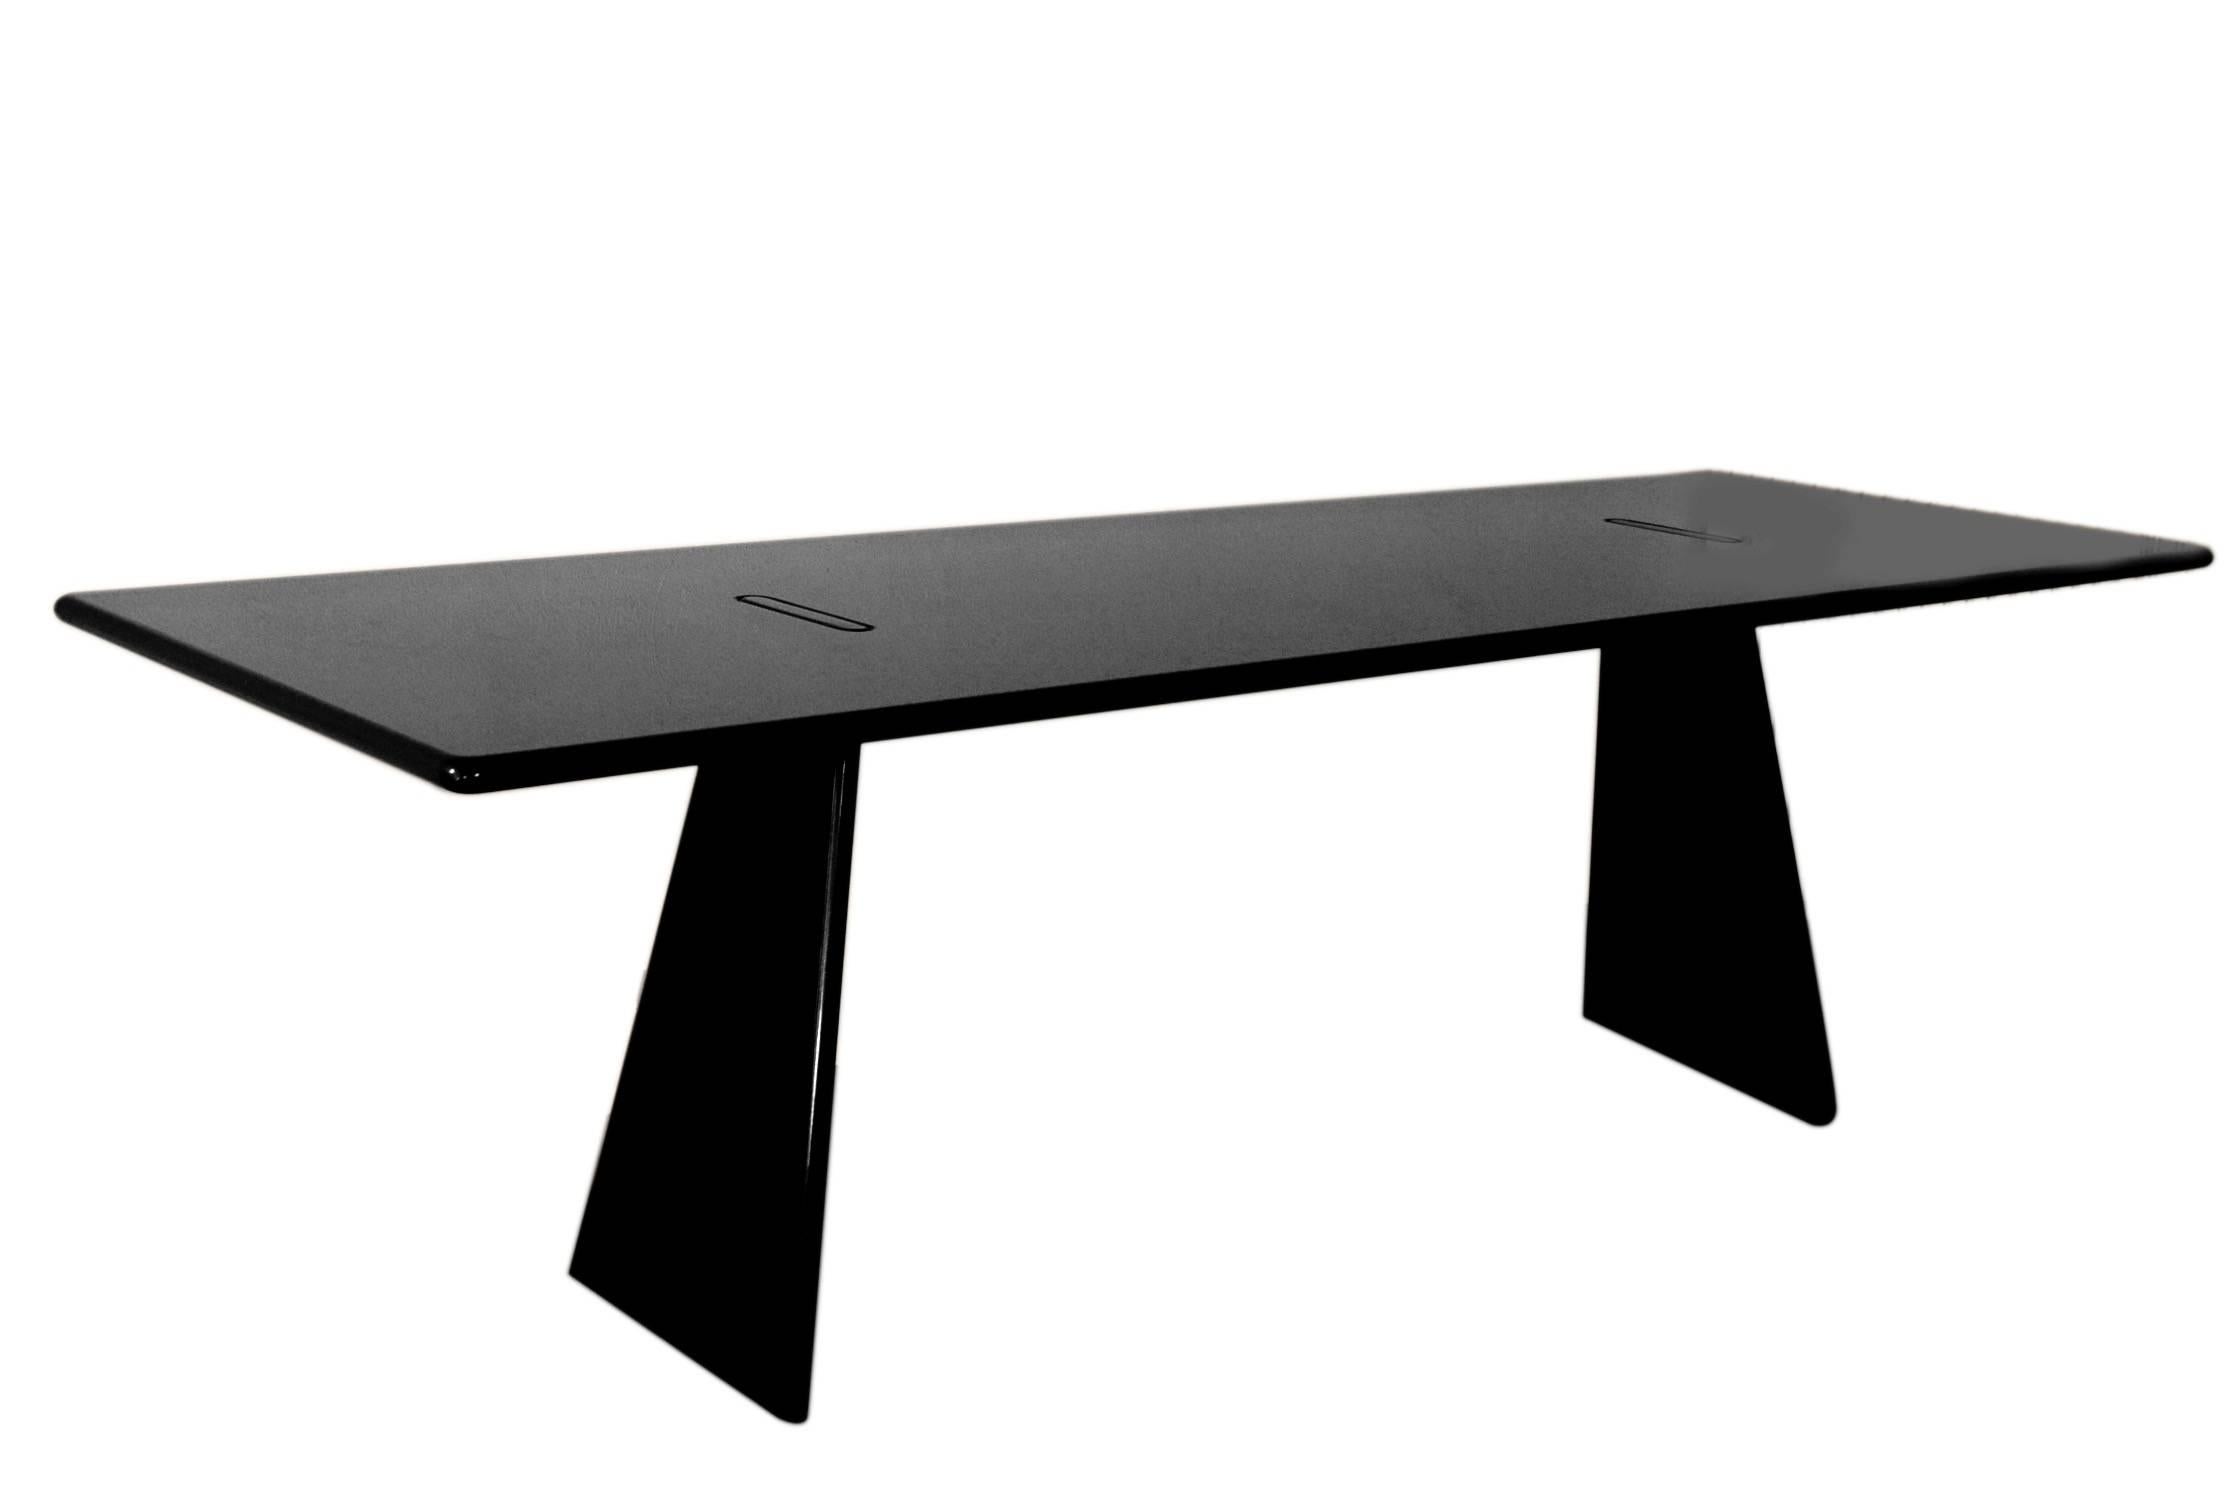 Table from the series “Asolo” in dark granite.
Manufactured by Skipper, Italy, 1981.
Measures: cm 240 x 80 H. cm 72.
    